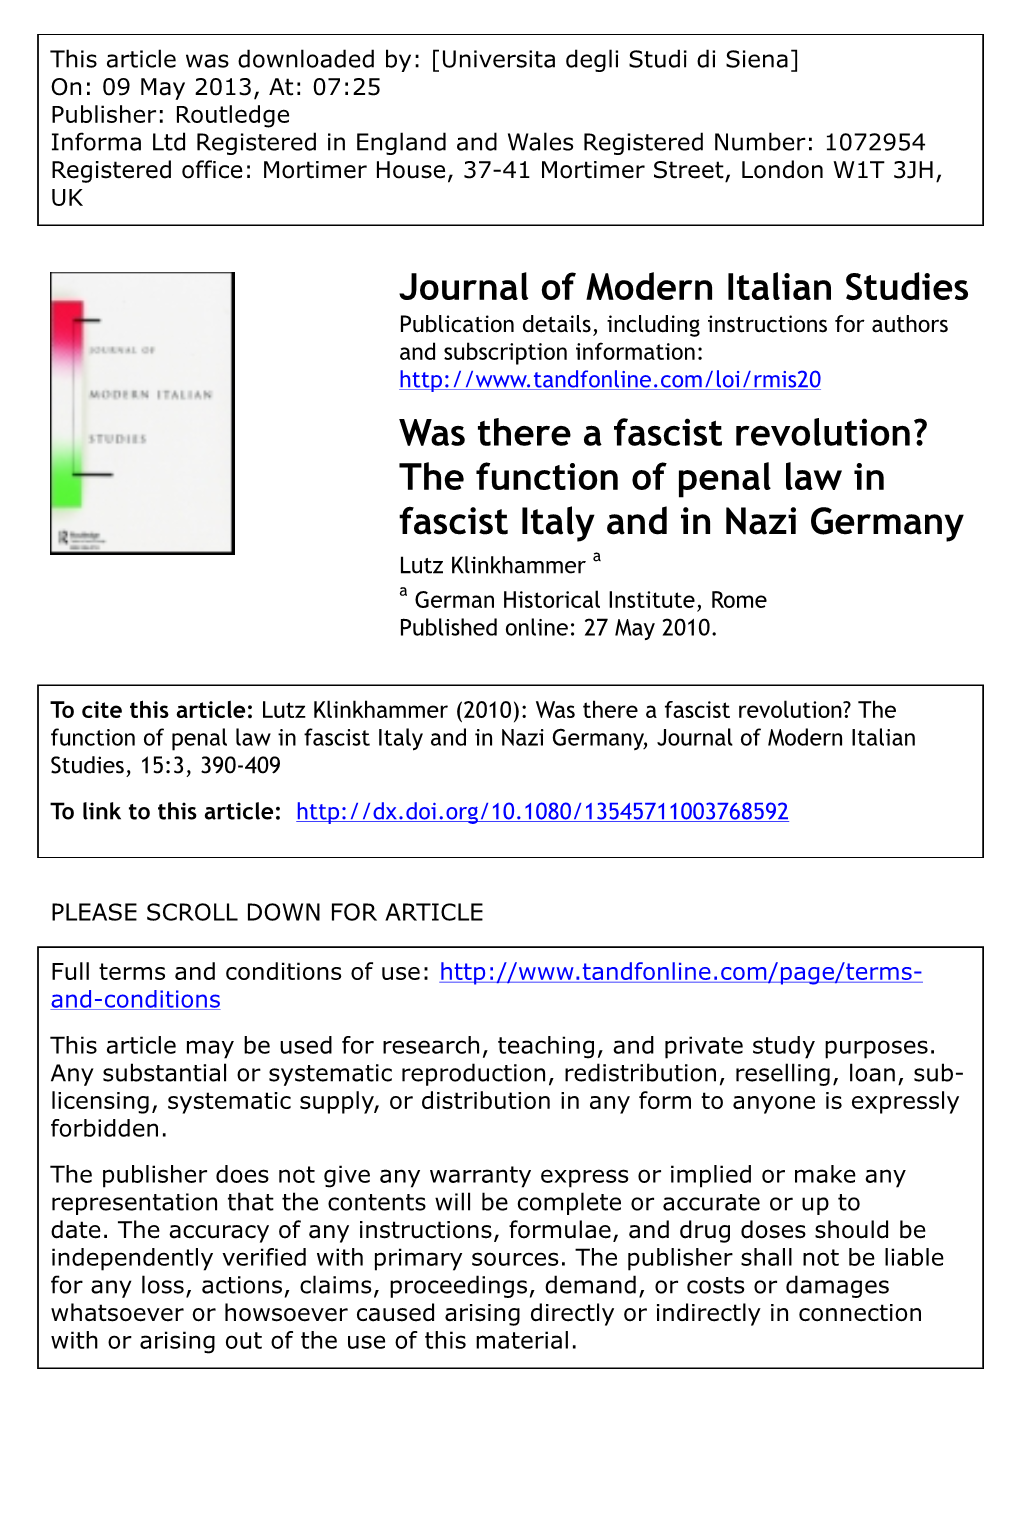 Was There a Fascist Revolution? the Function of Penal Law in Fascist Italy and in Nazi Germany